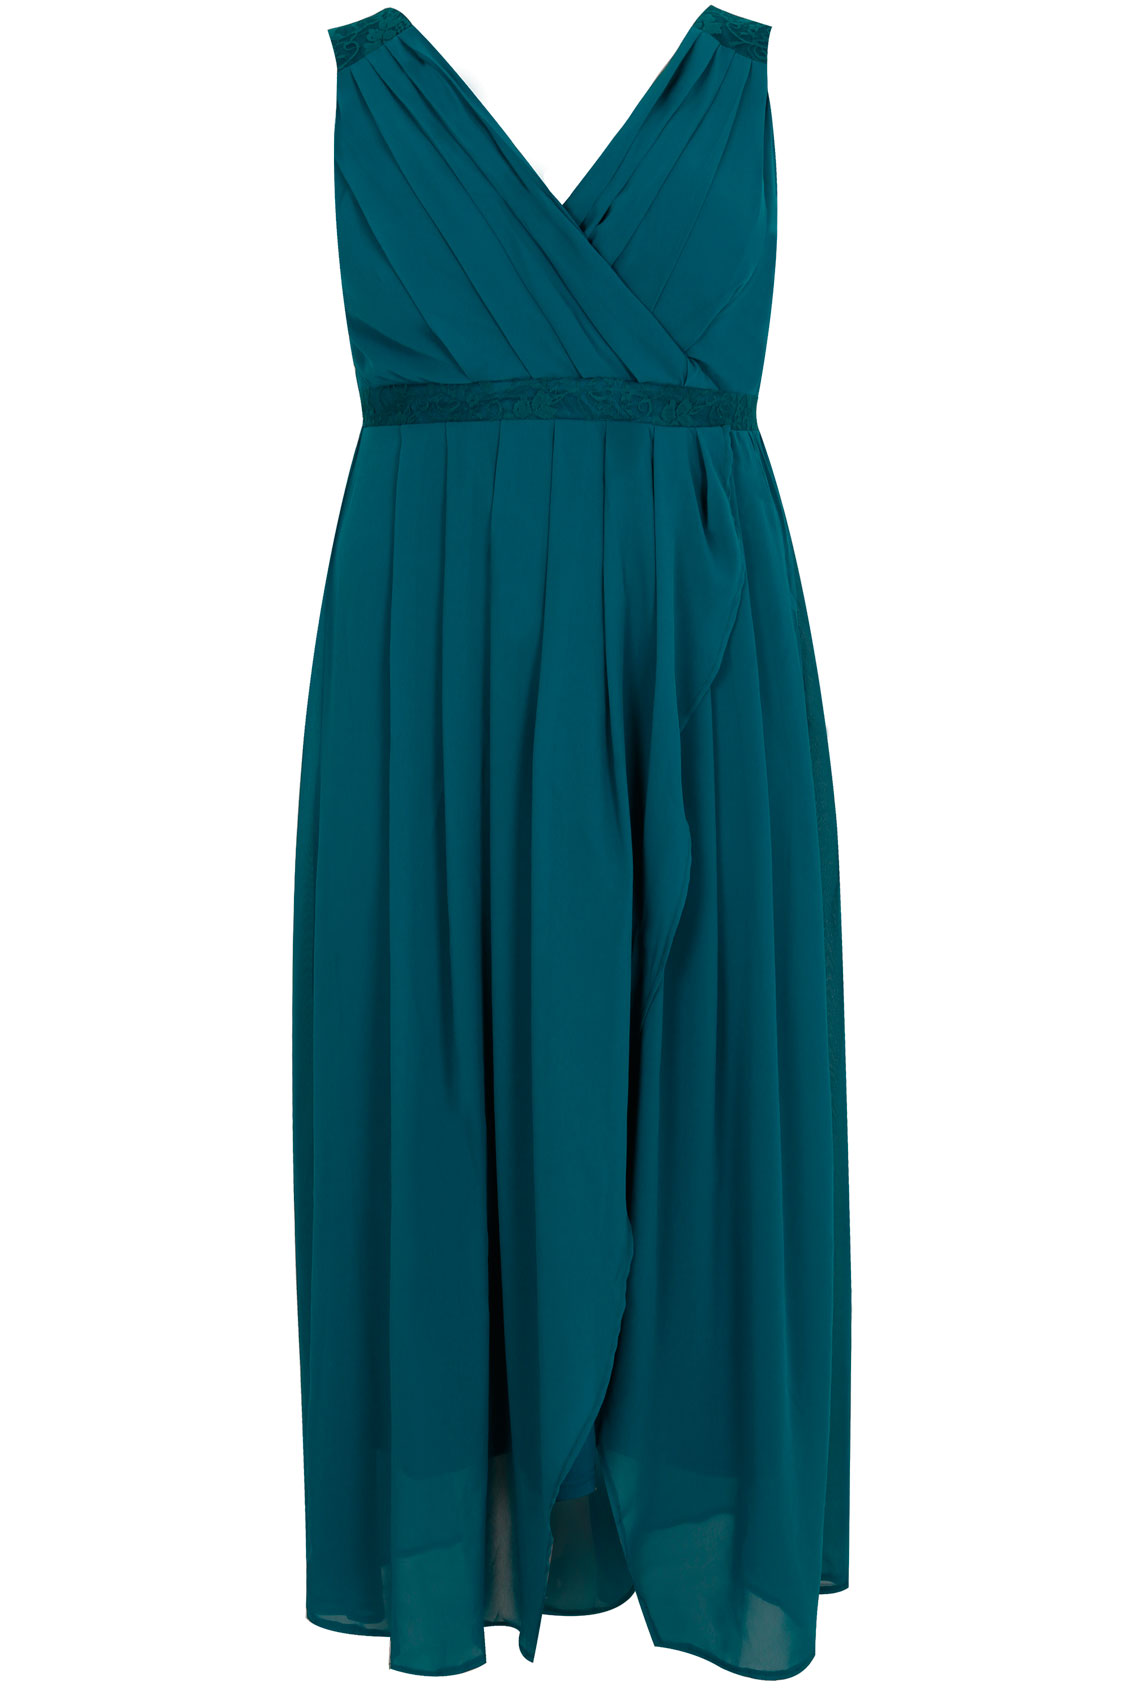 Teal Ruched Chiffon Maxi Wrap Dress With Lace Detail, Plus size 16 to 36